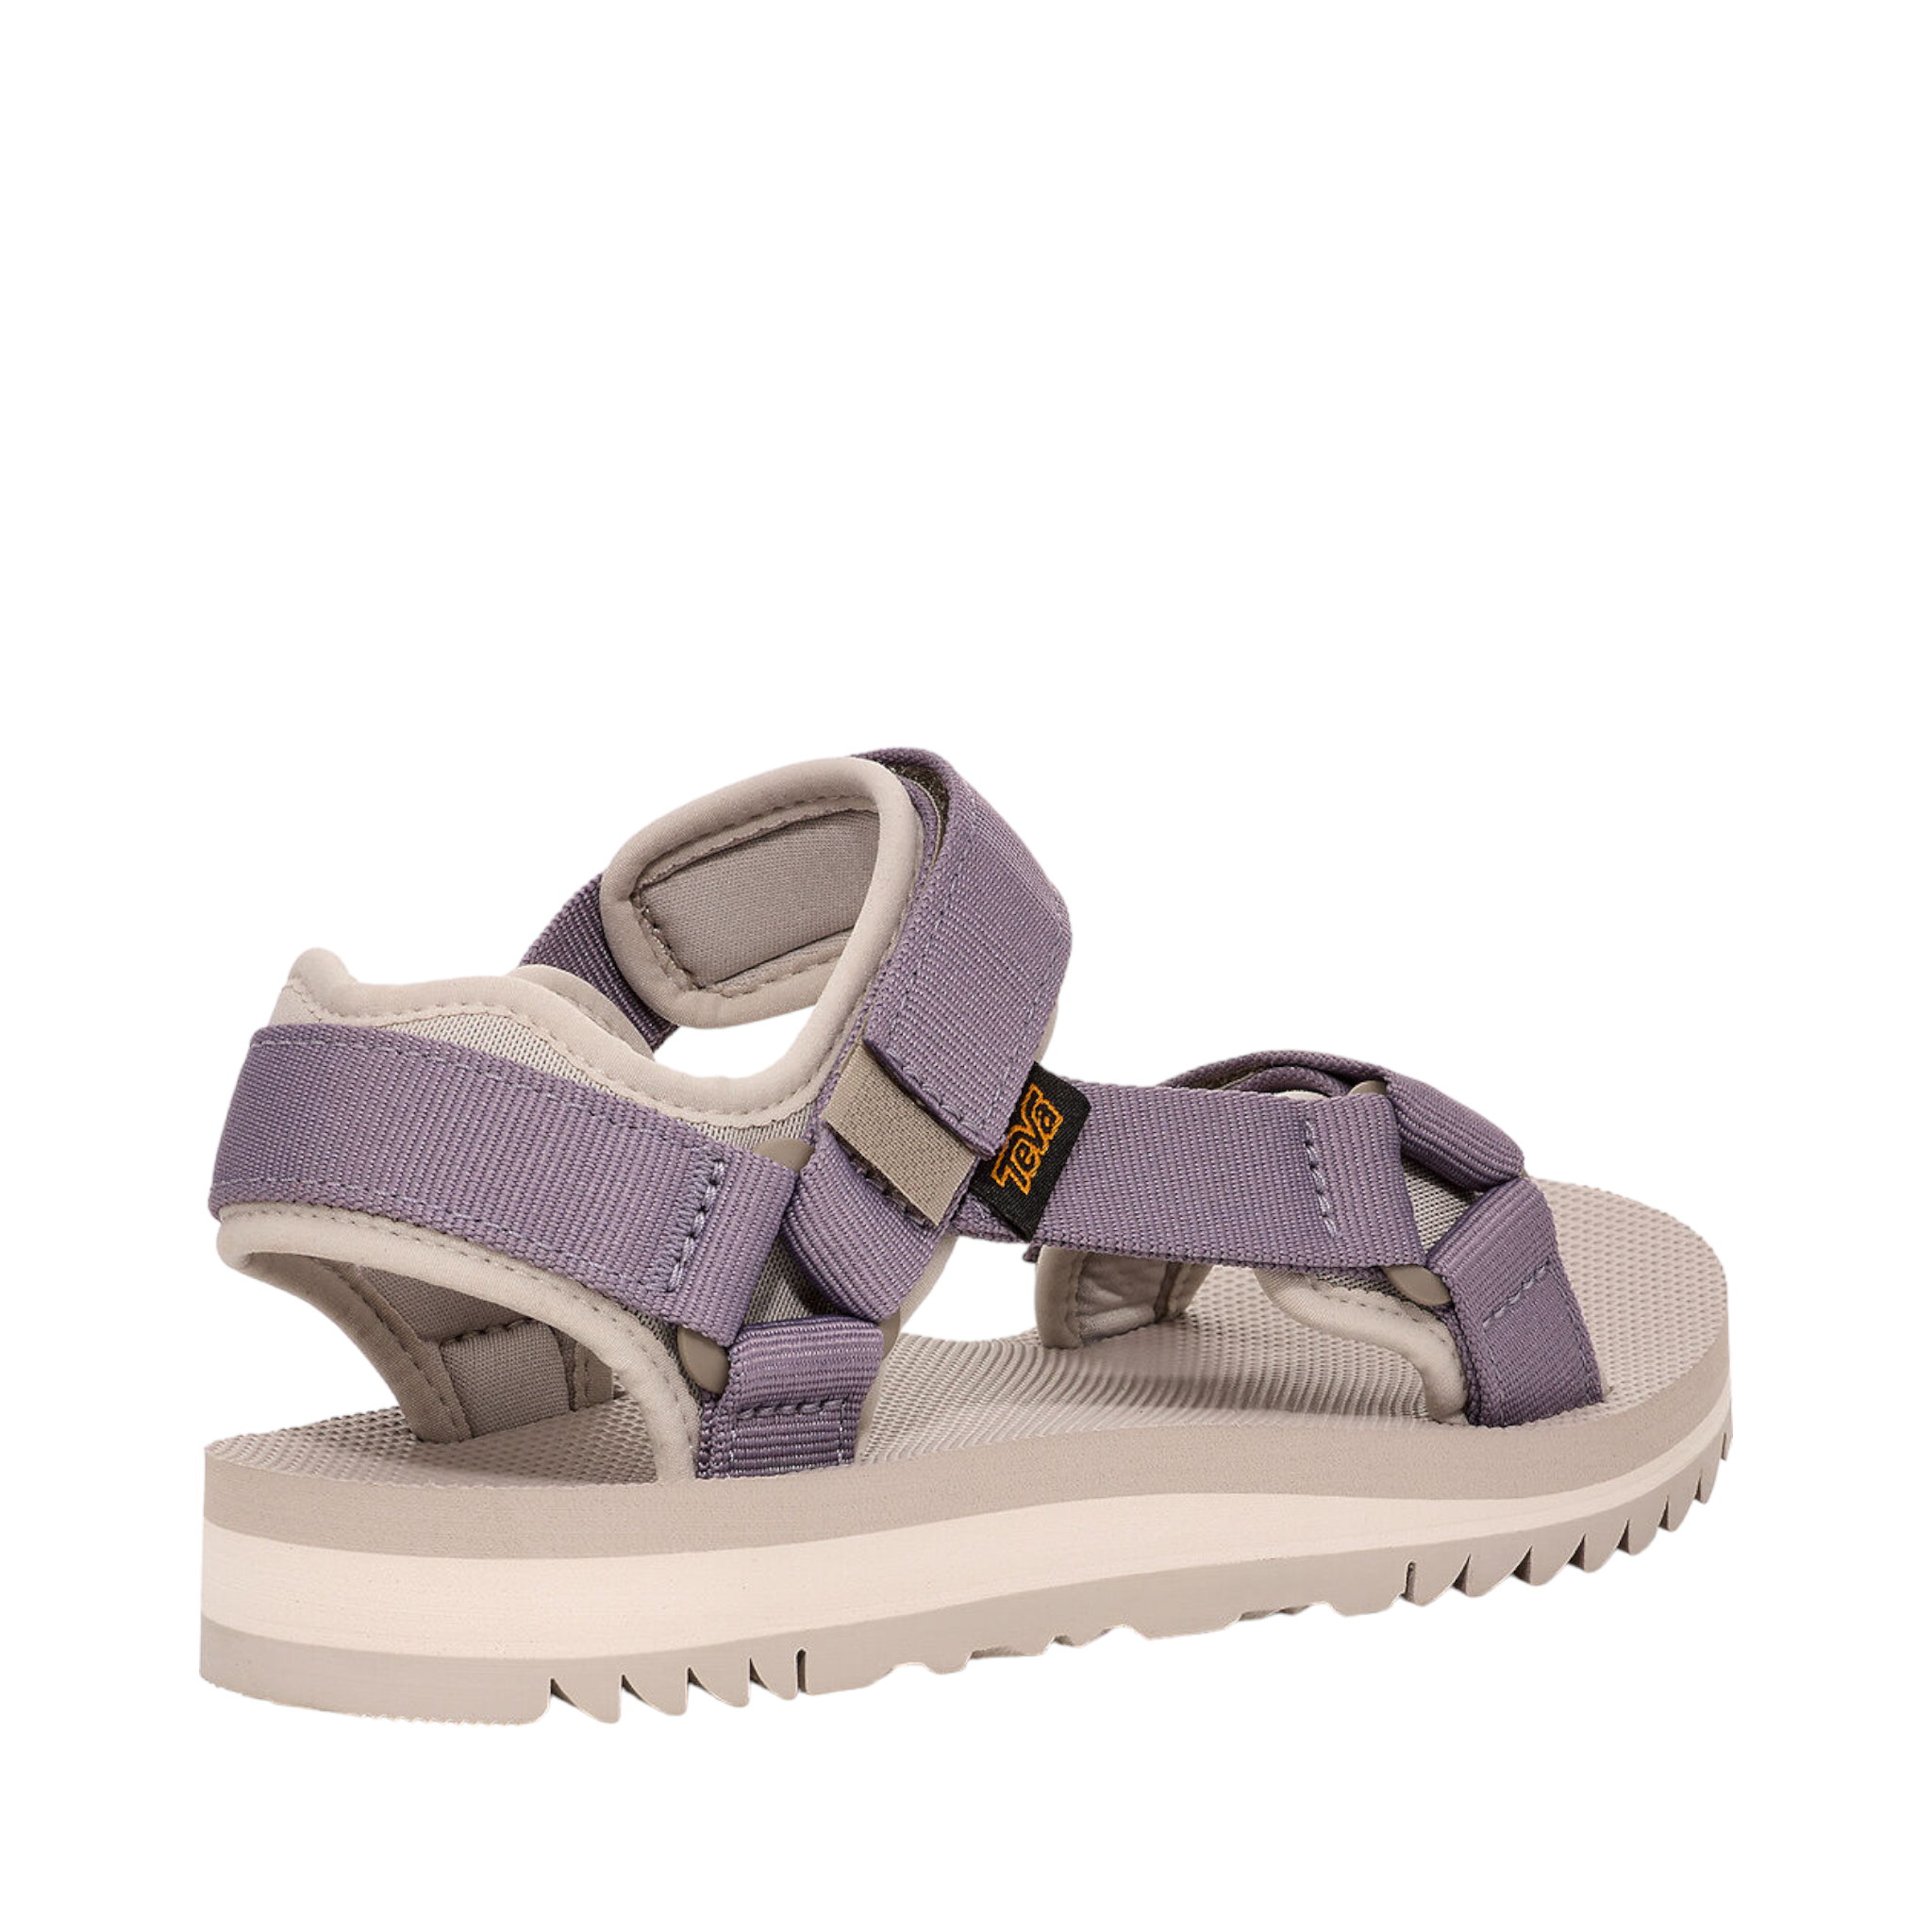 Shop W Universal Trail - with shoe&amp;me - from Teva - Sandals - Sandal, Summer, Womens